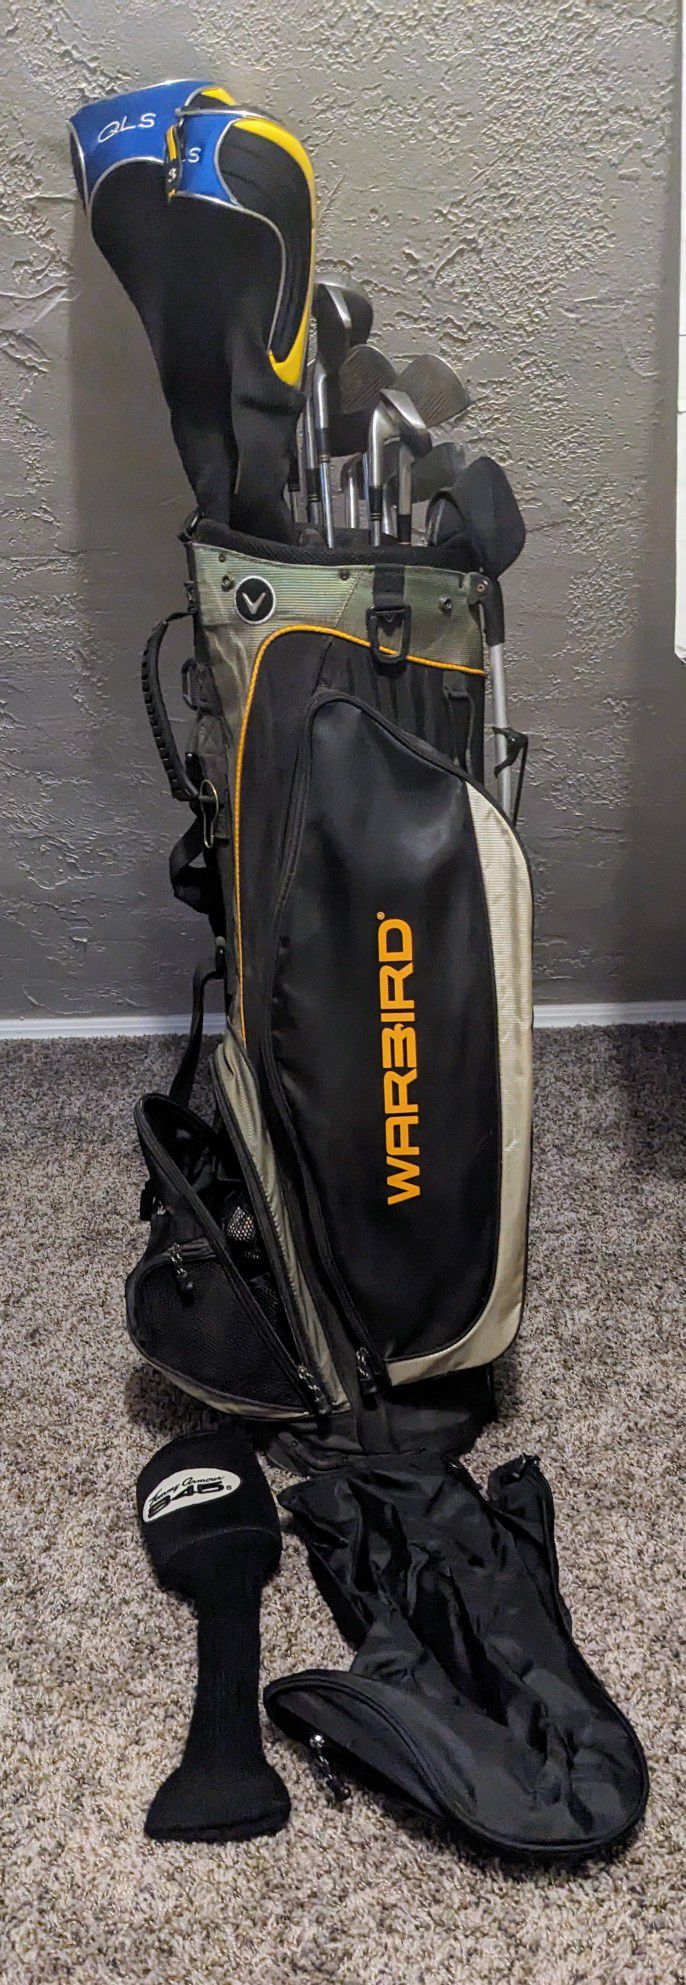 Used Callaway Warbird Golf Set And Bag + Accessories Good Deal Get Today